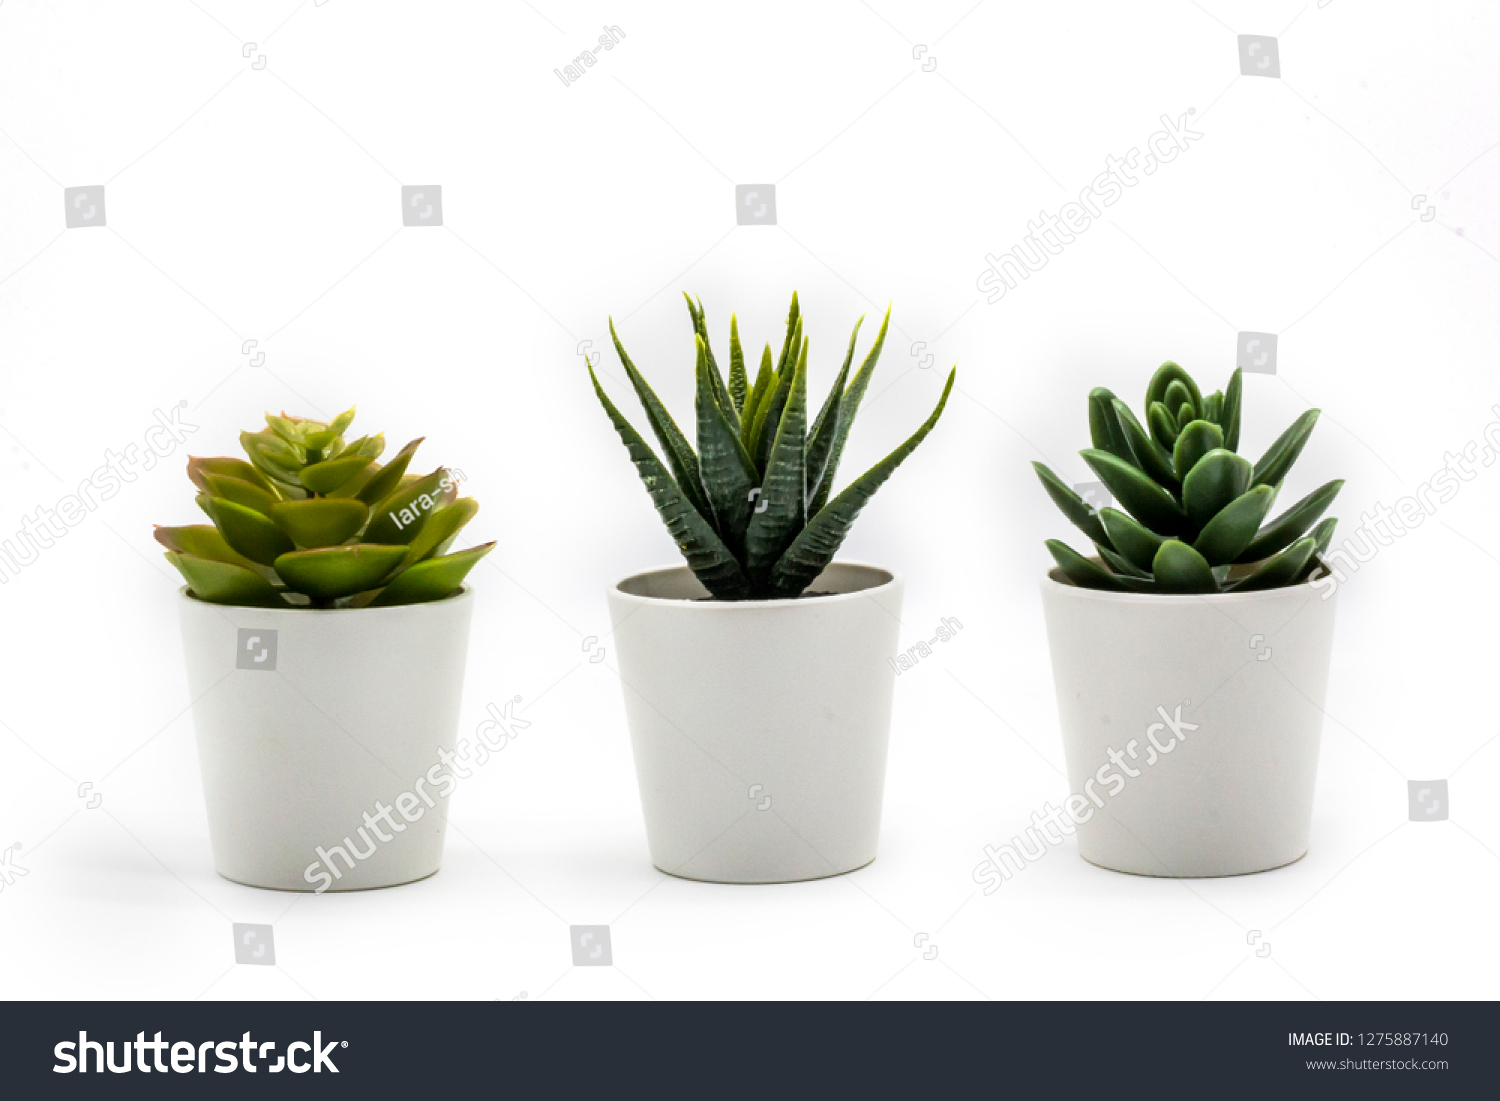 Natural green succulents cactus, Haworthia attenuata in white flowerpot isolated on white background #1275887140